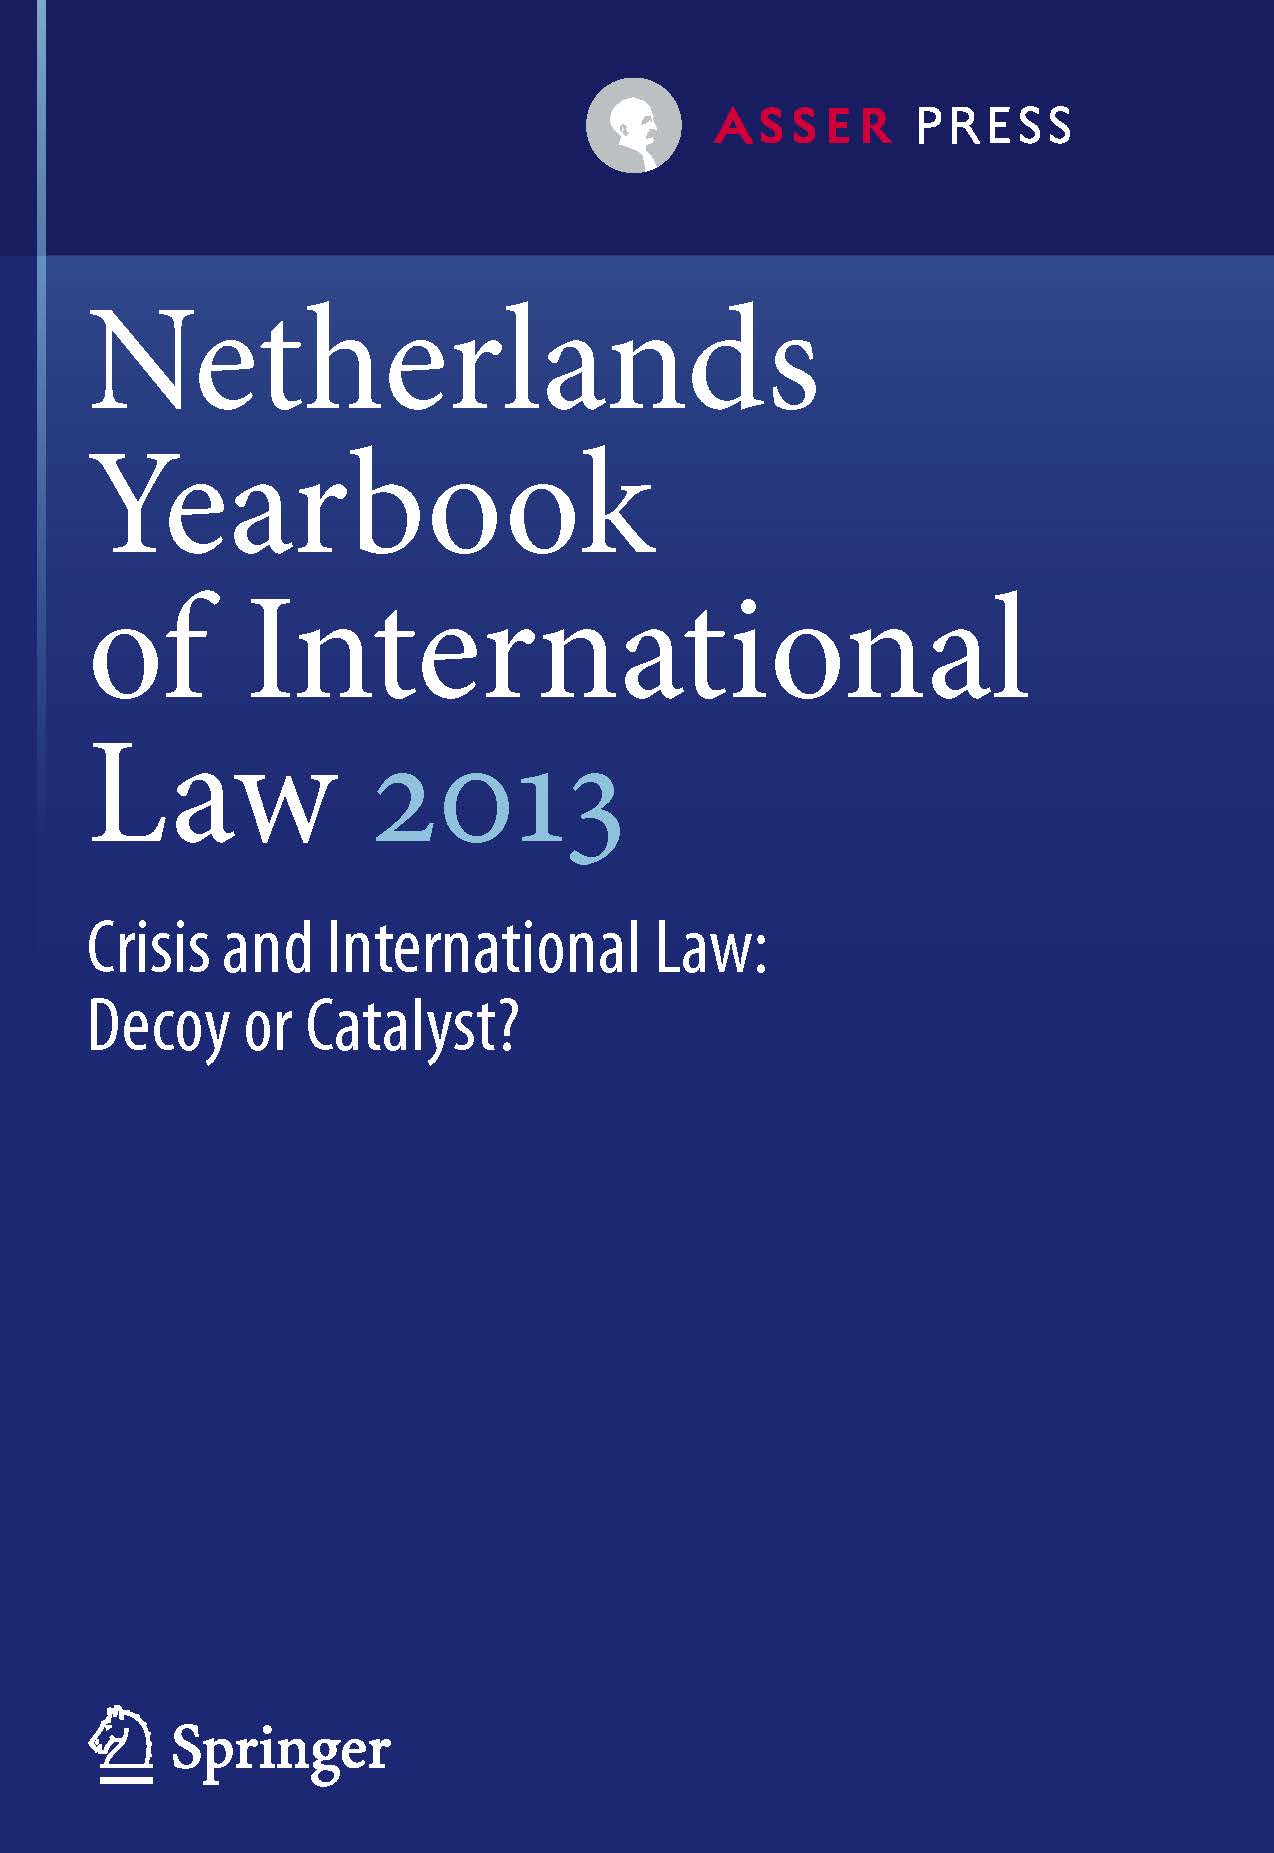 Netherlands Yearbook of International Law - Volume 44, 2013 - Crisis and International Law: Decoy or Catalyst?